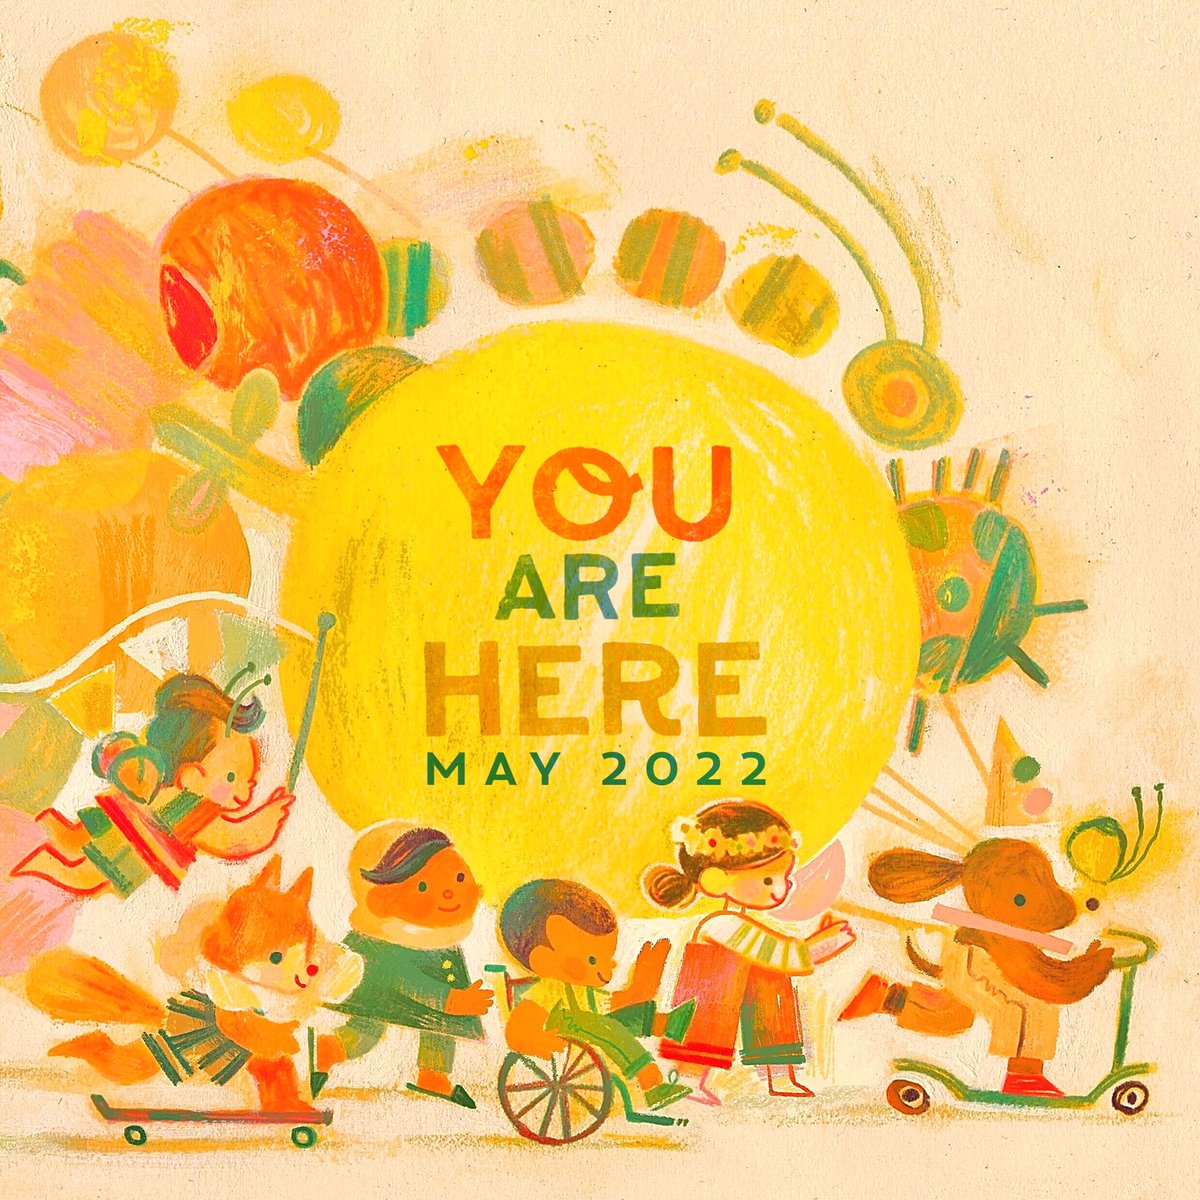 My debut picture book, “You Are Here” with @ChronicleKids is coming out May 10, 2022! Available for Pre-Order now through Chronicle & your favorite bookstore! 🌈